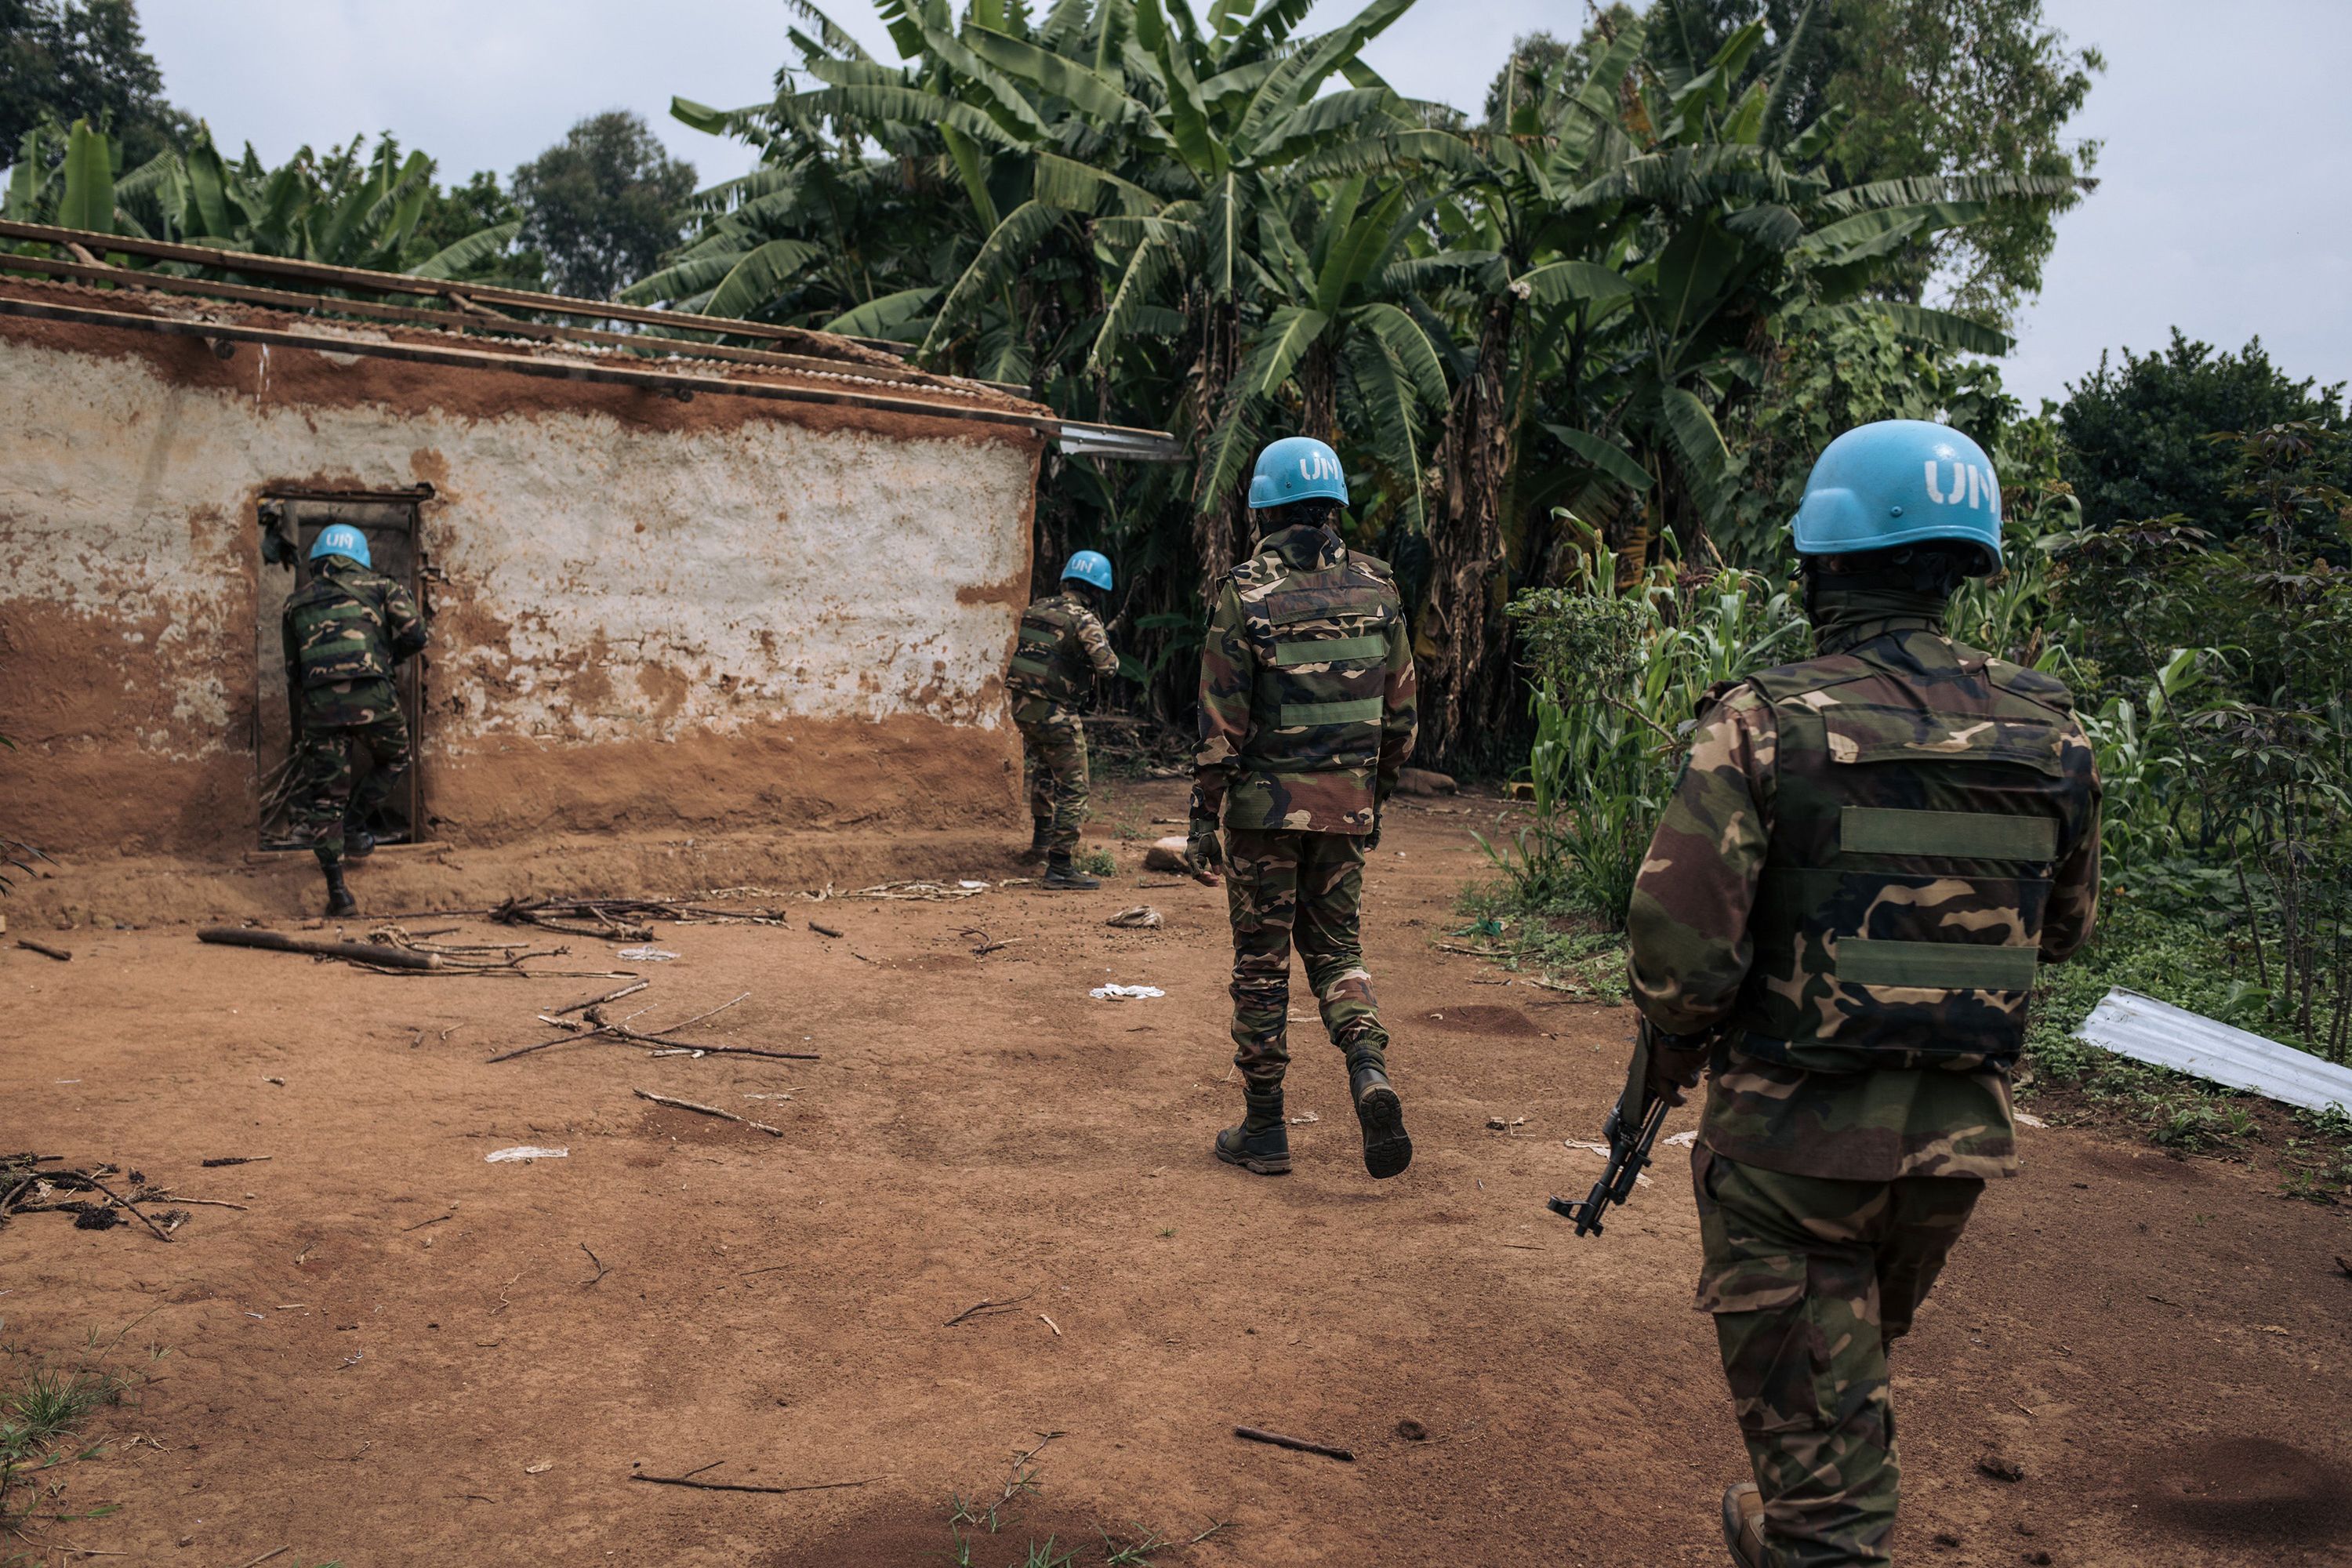 DRC President Tshisekedi tells UN peacekeepers to leave the